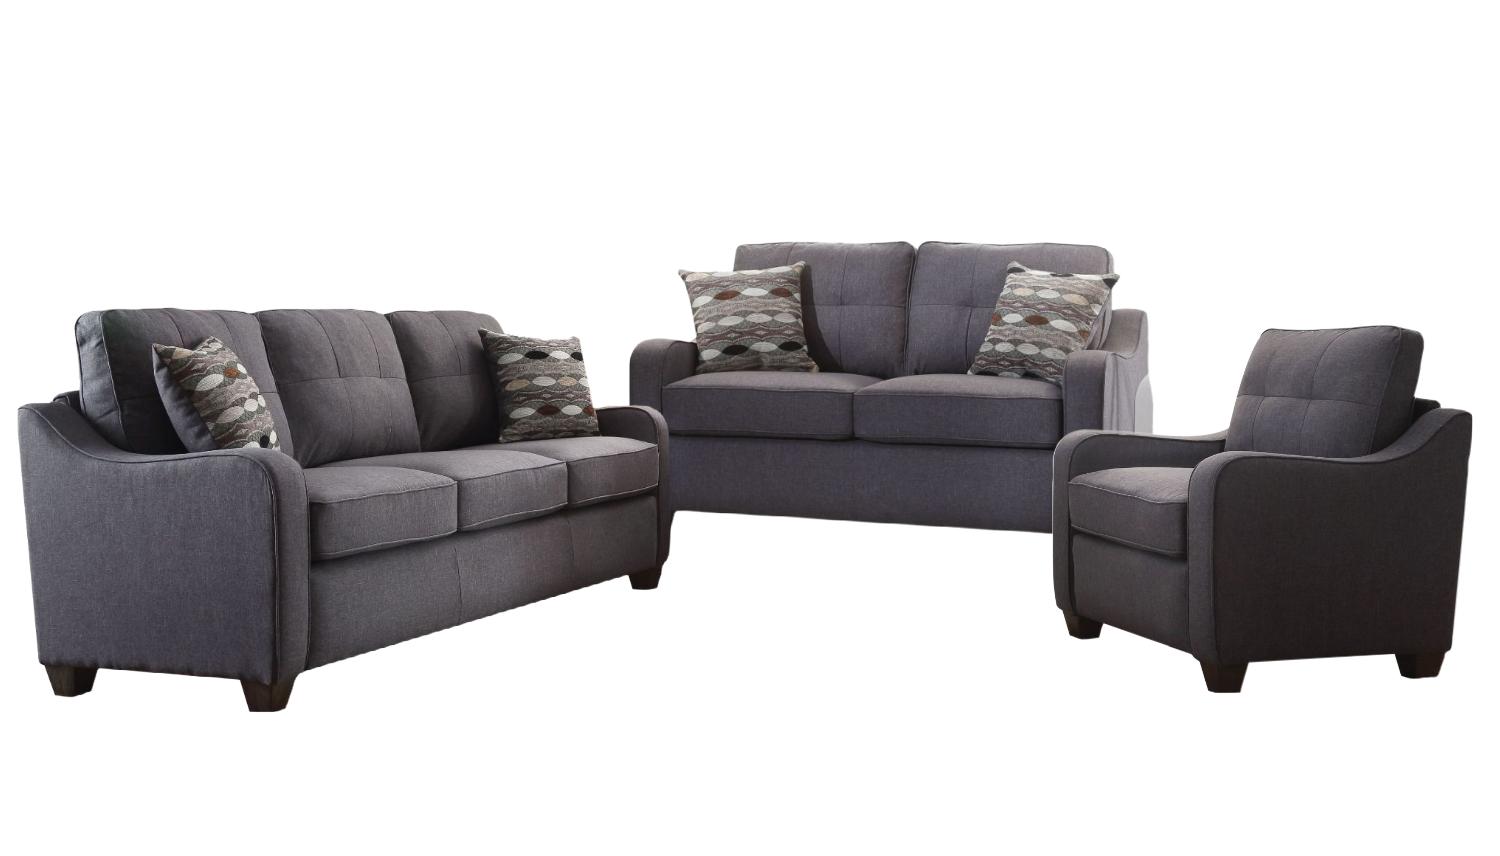 Modern Sofa Loveseat and Chair Set Cleavon II 53790-3pcs in Gray Linen